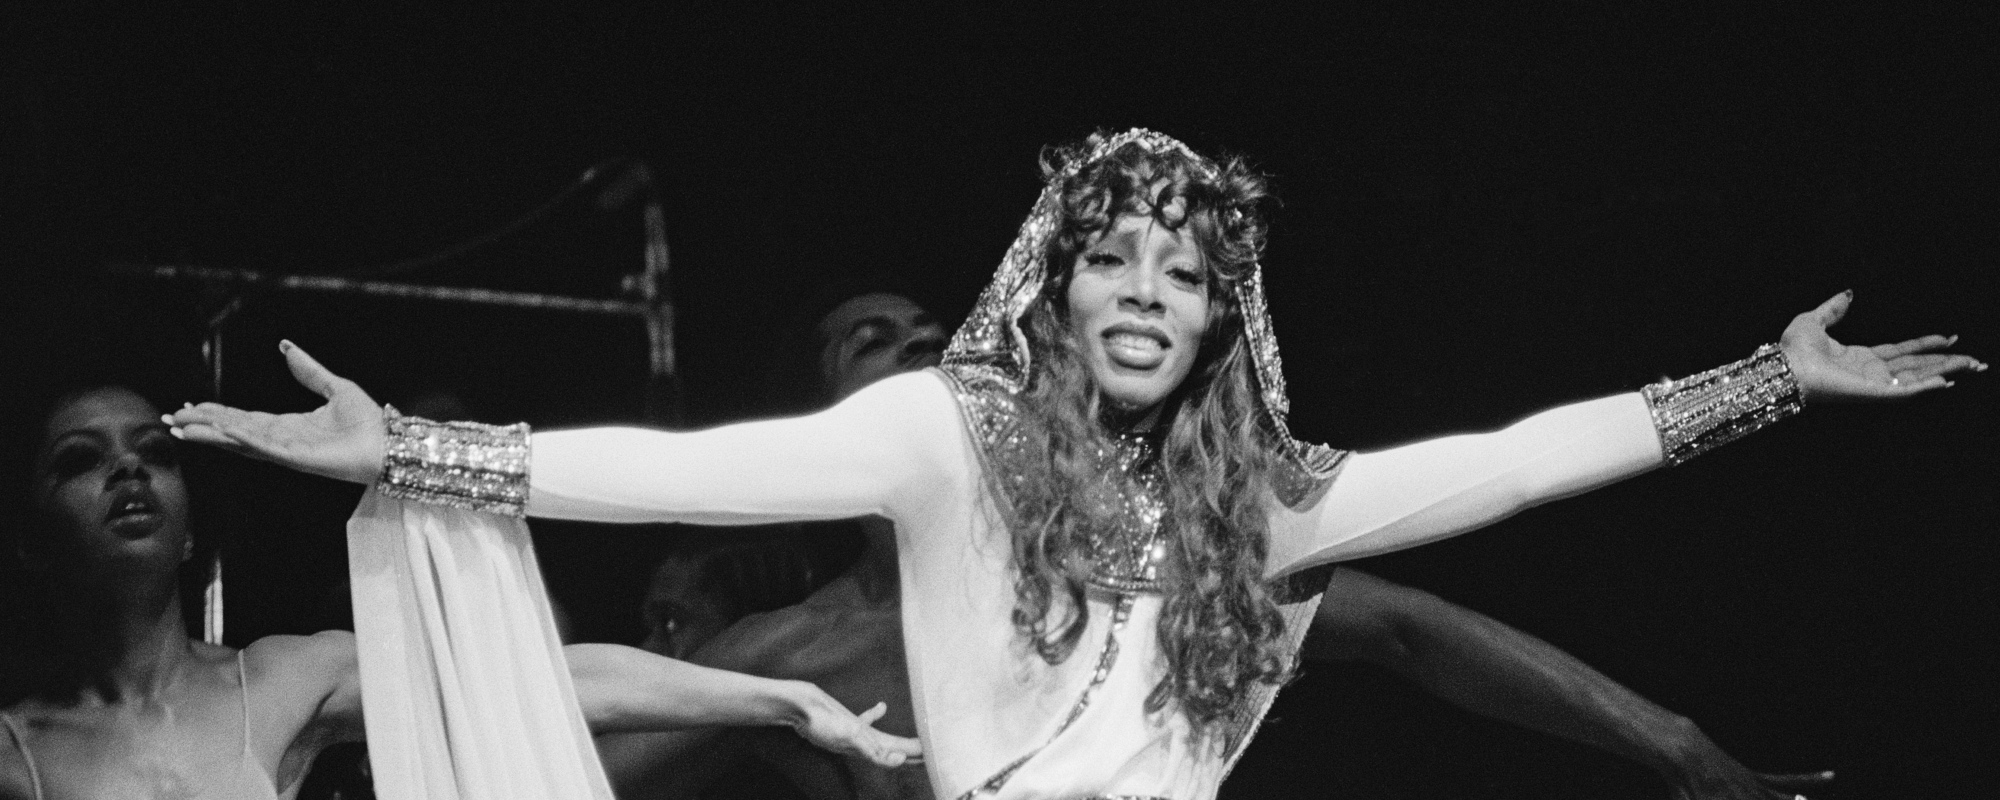 Possessions From the Home of Donna Summer Are Being Auctioned